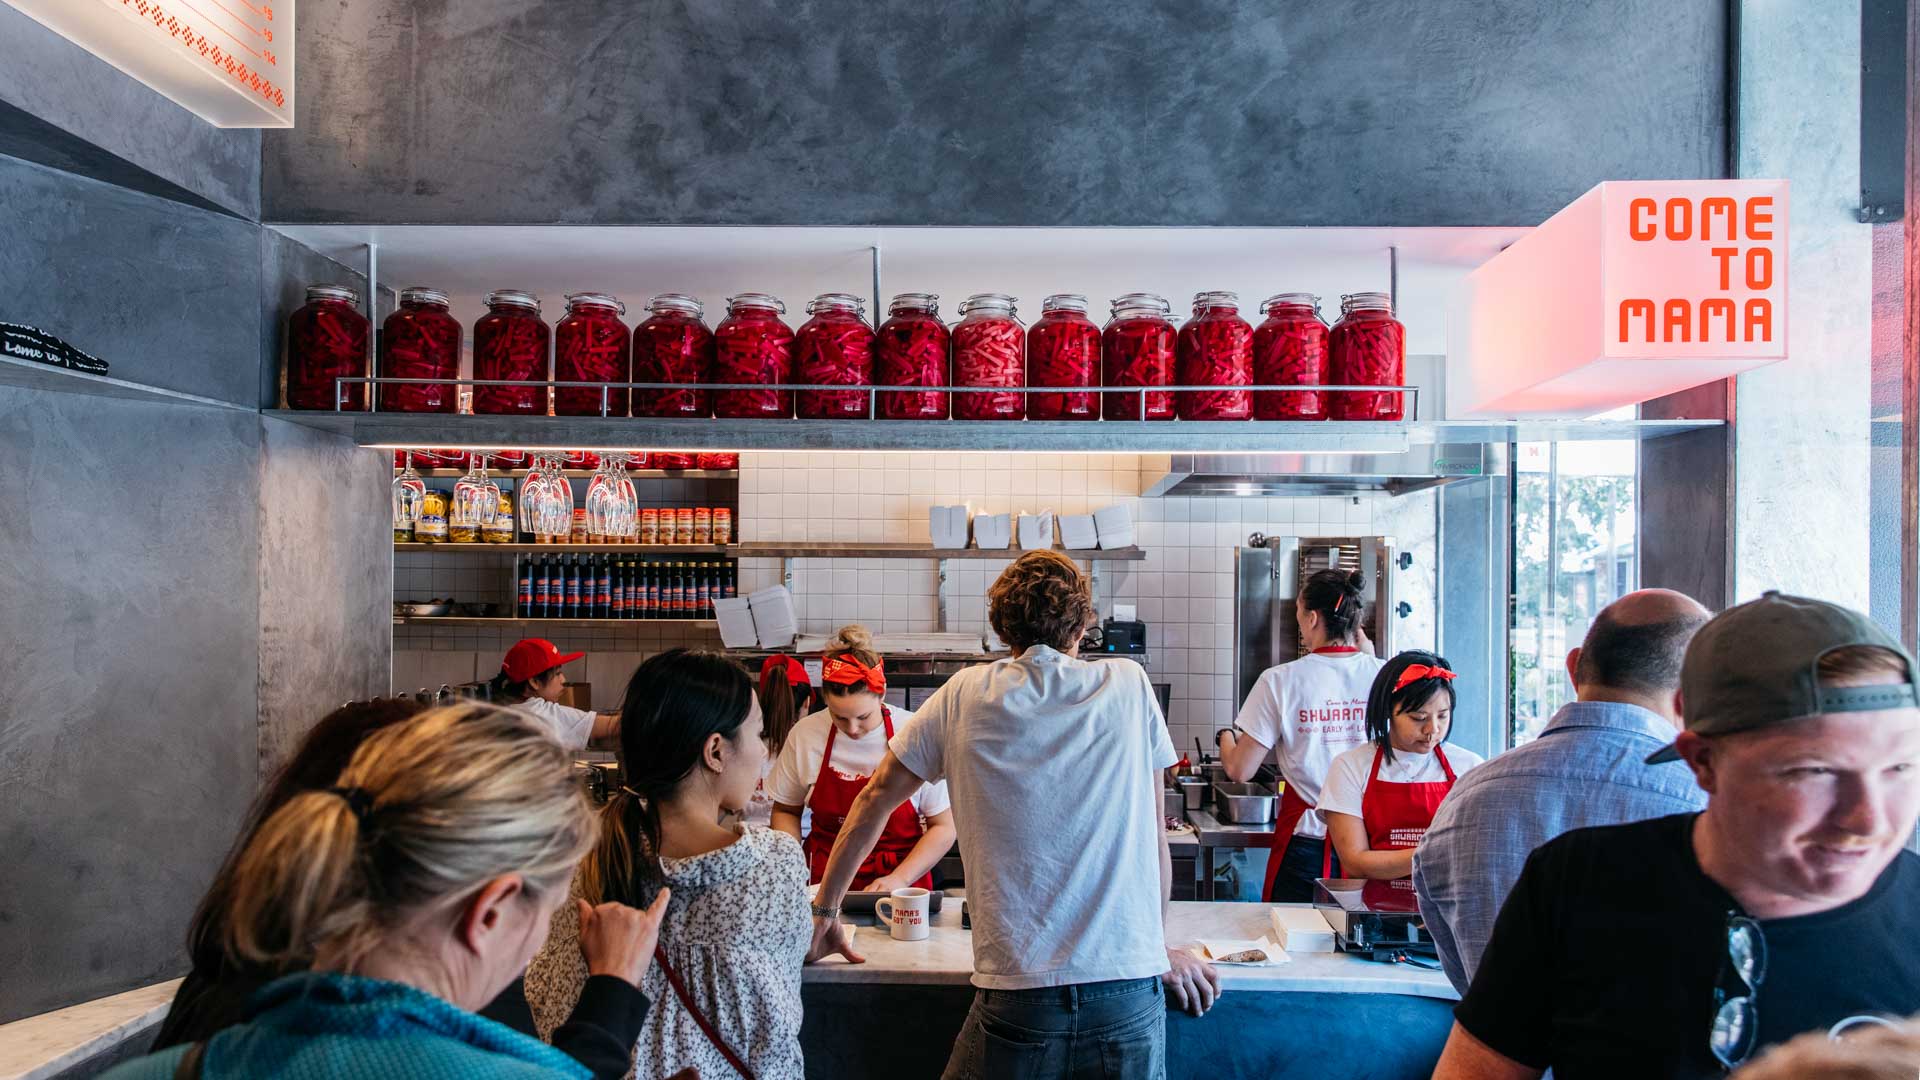 Shwarmama Is Surry Hills' New Hole-in-the-Wall Kebab Shop by Ester's Mat Lindsay